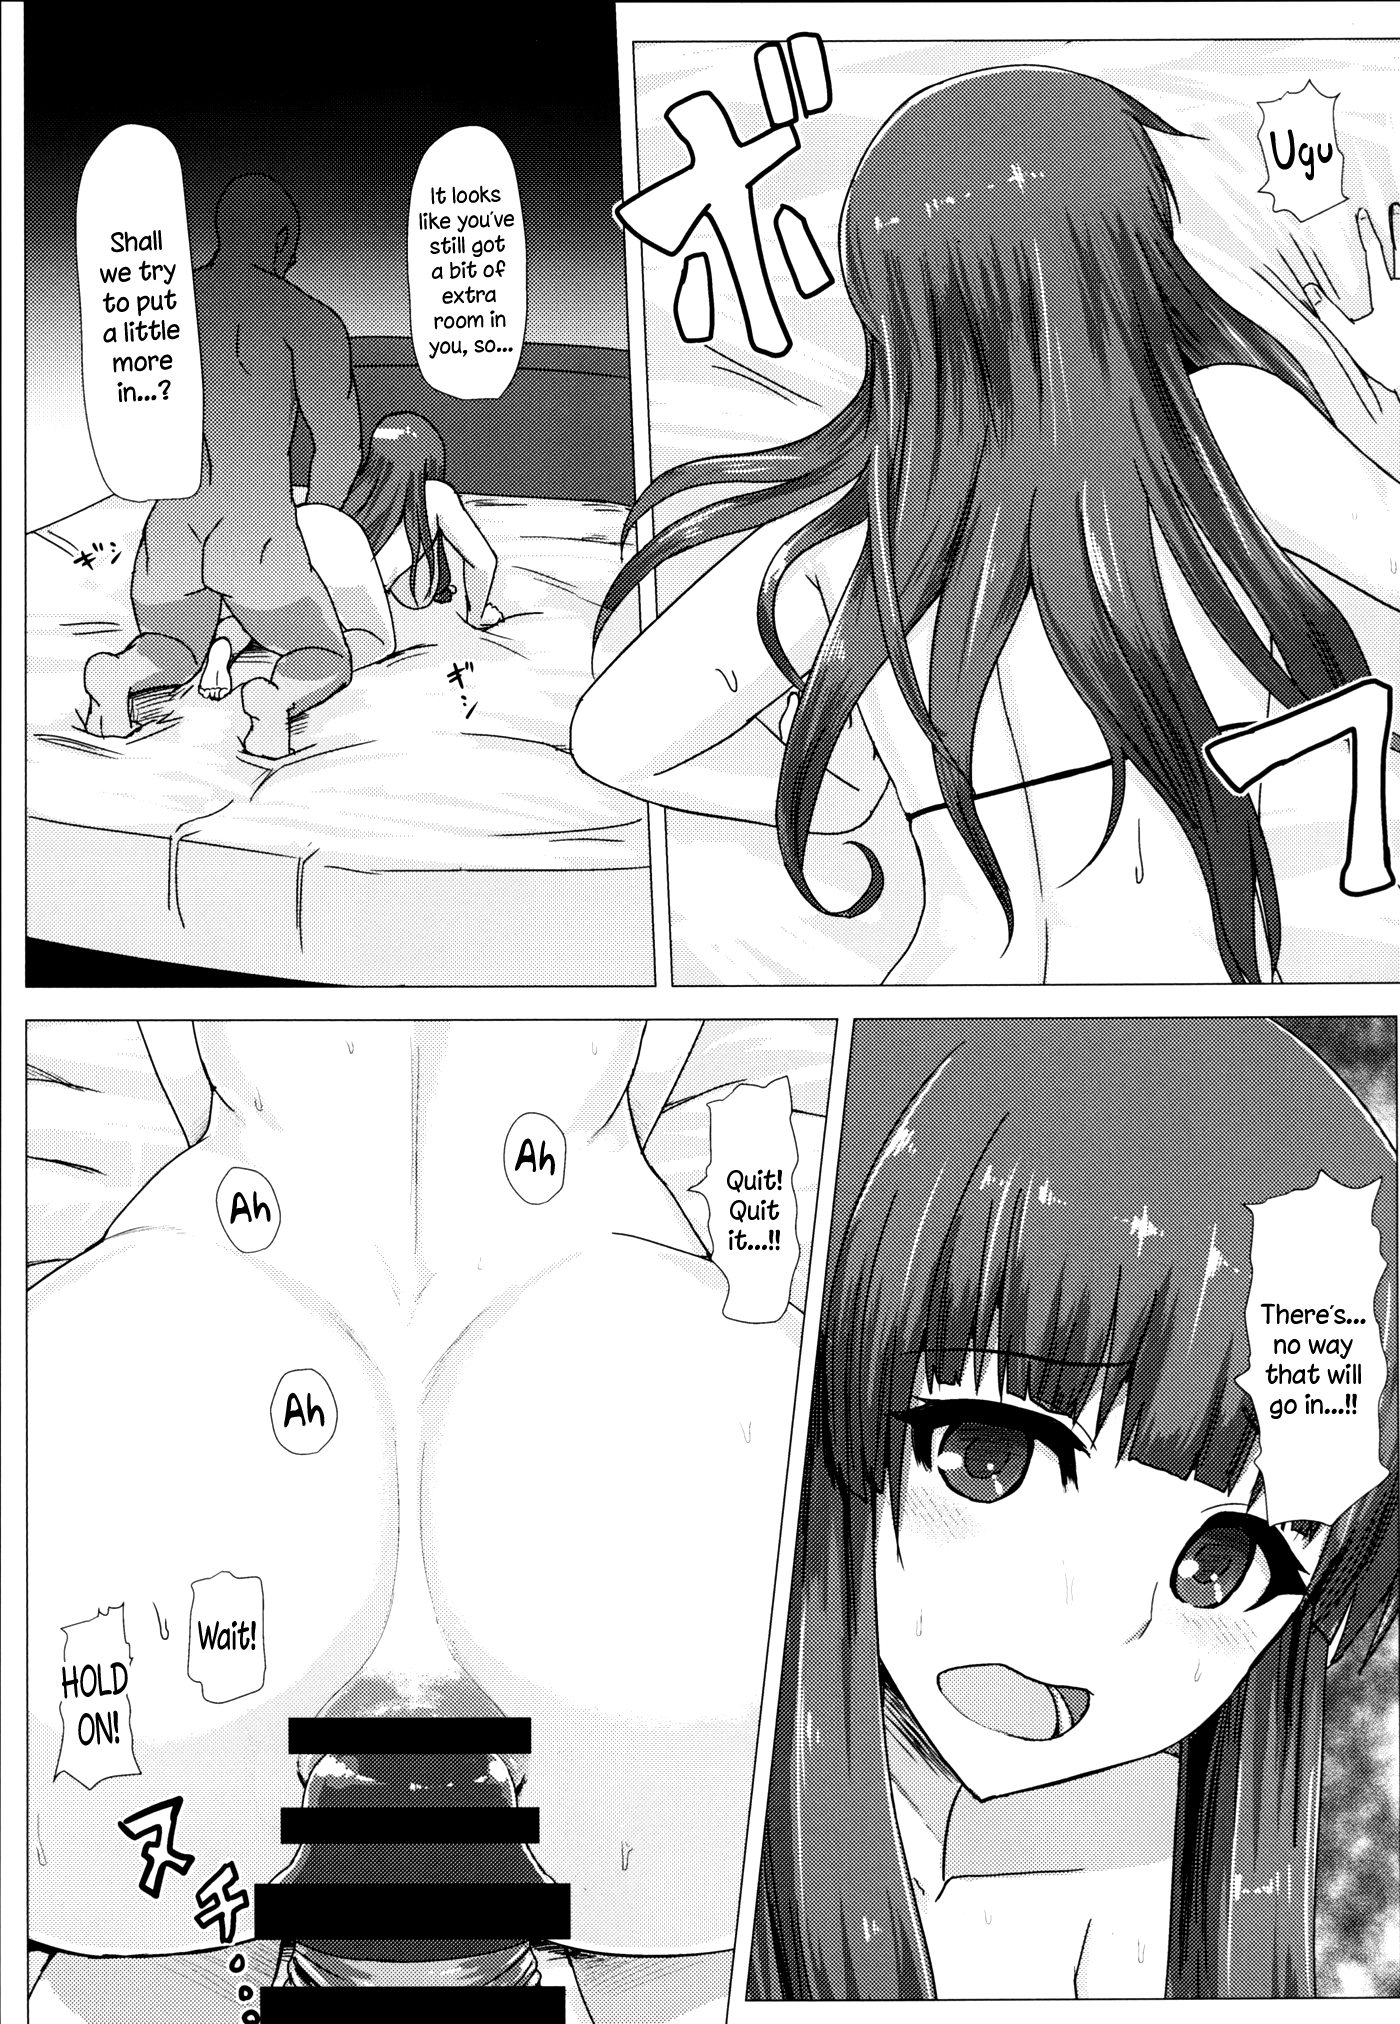 Ass Patchy Patchy hentai manga picture 16